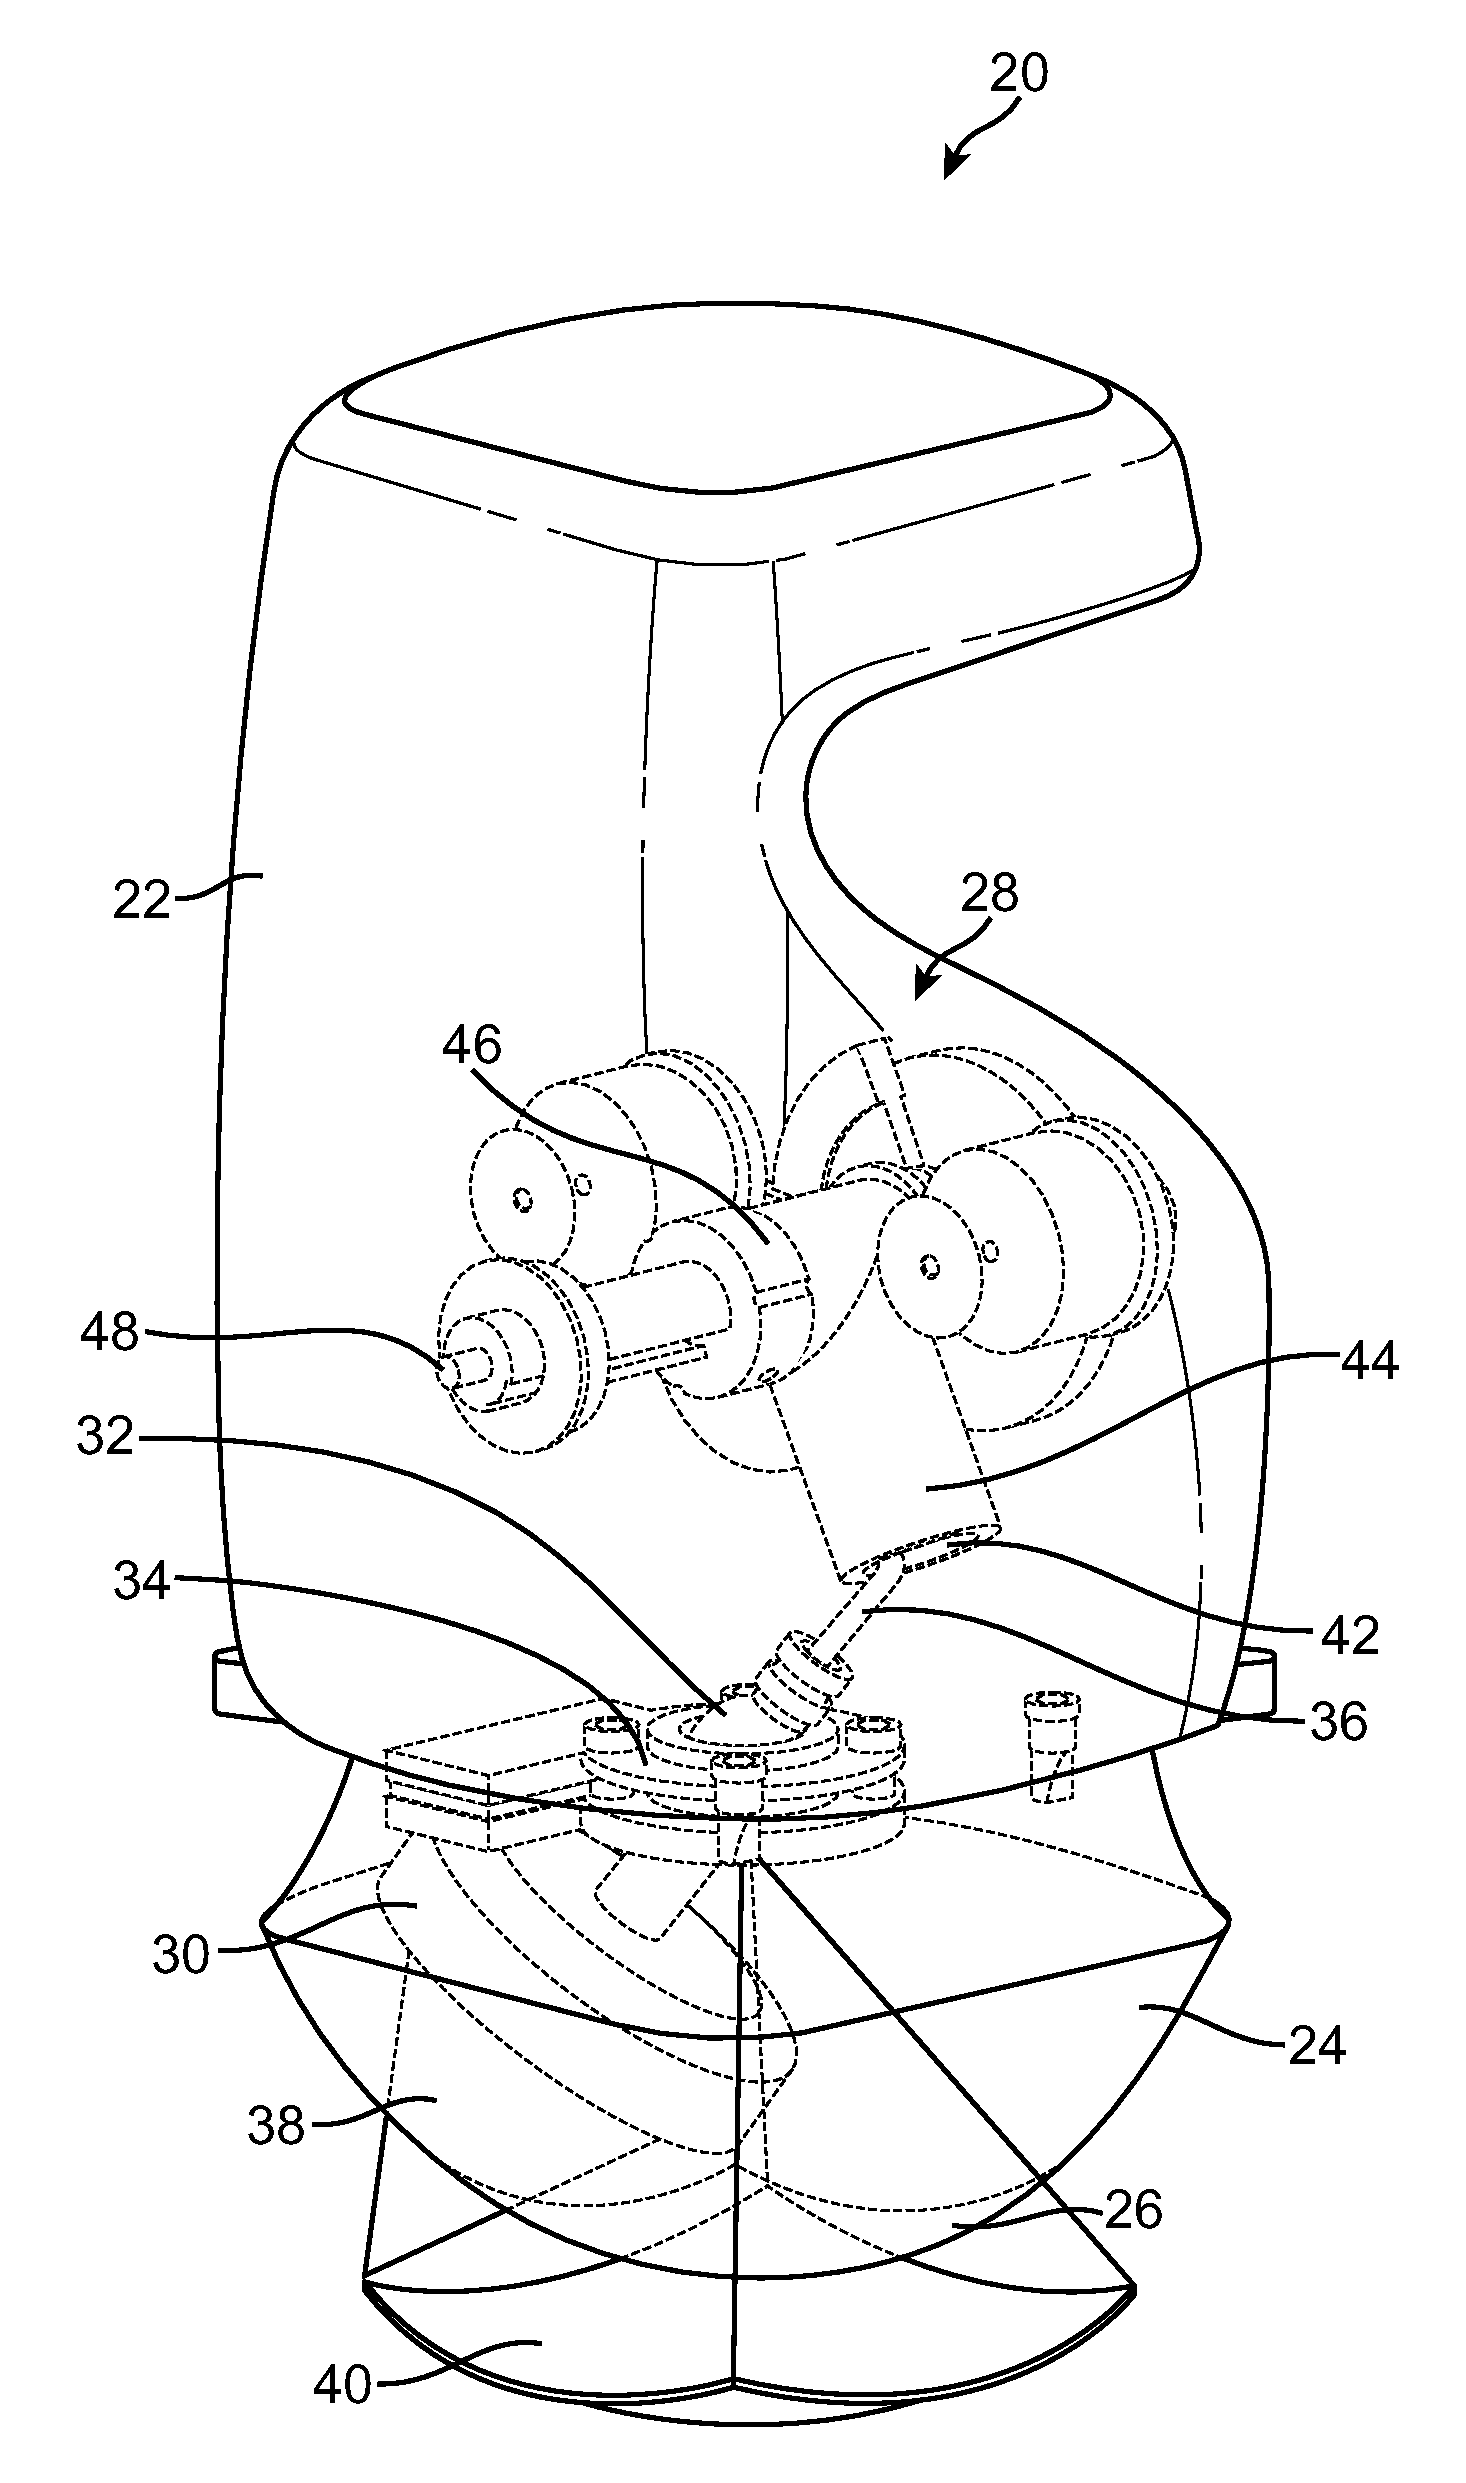 Therapy head for use with an ultrasound system